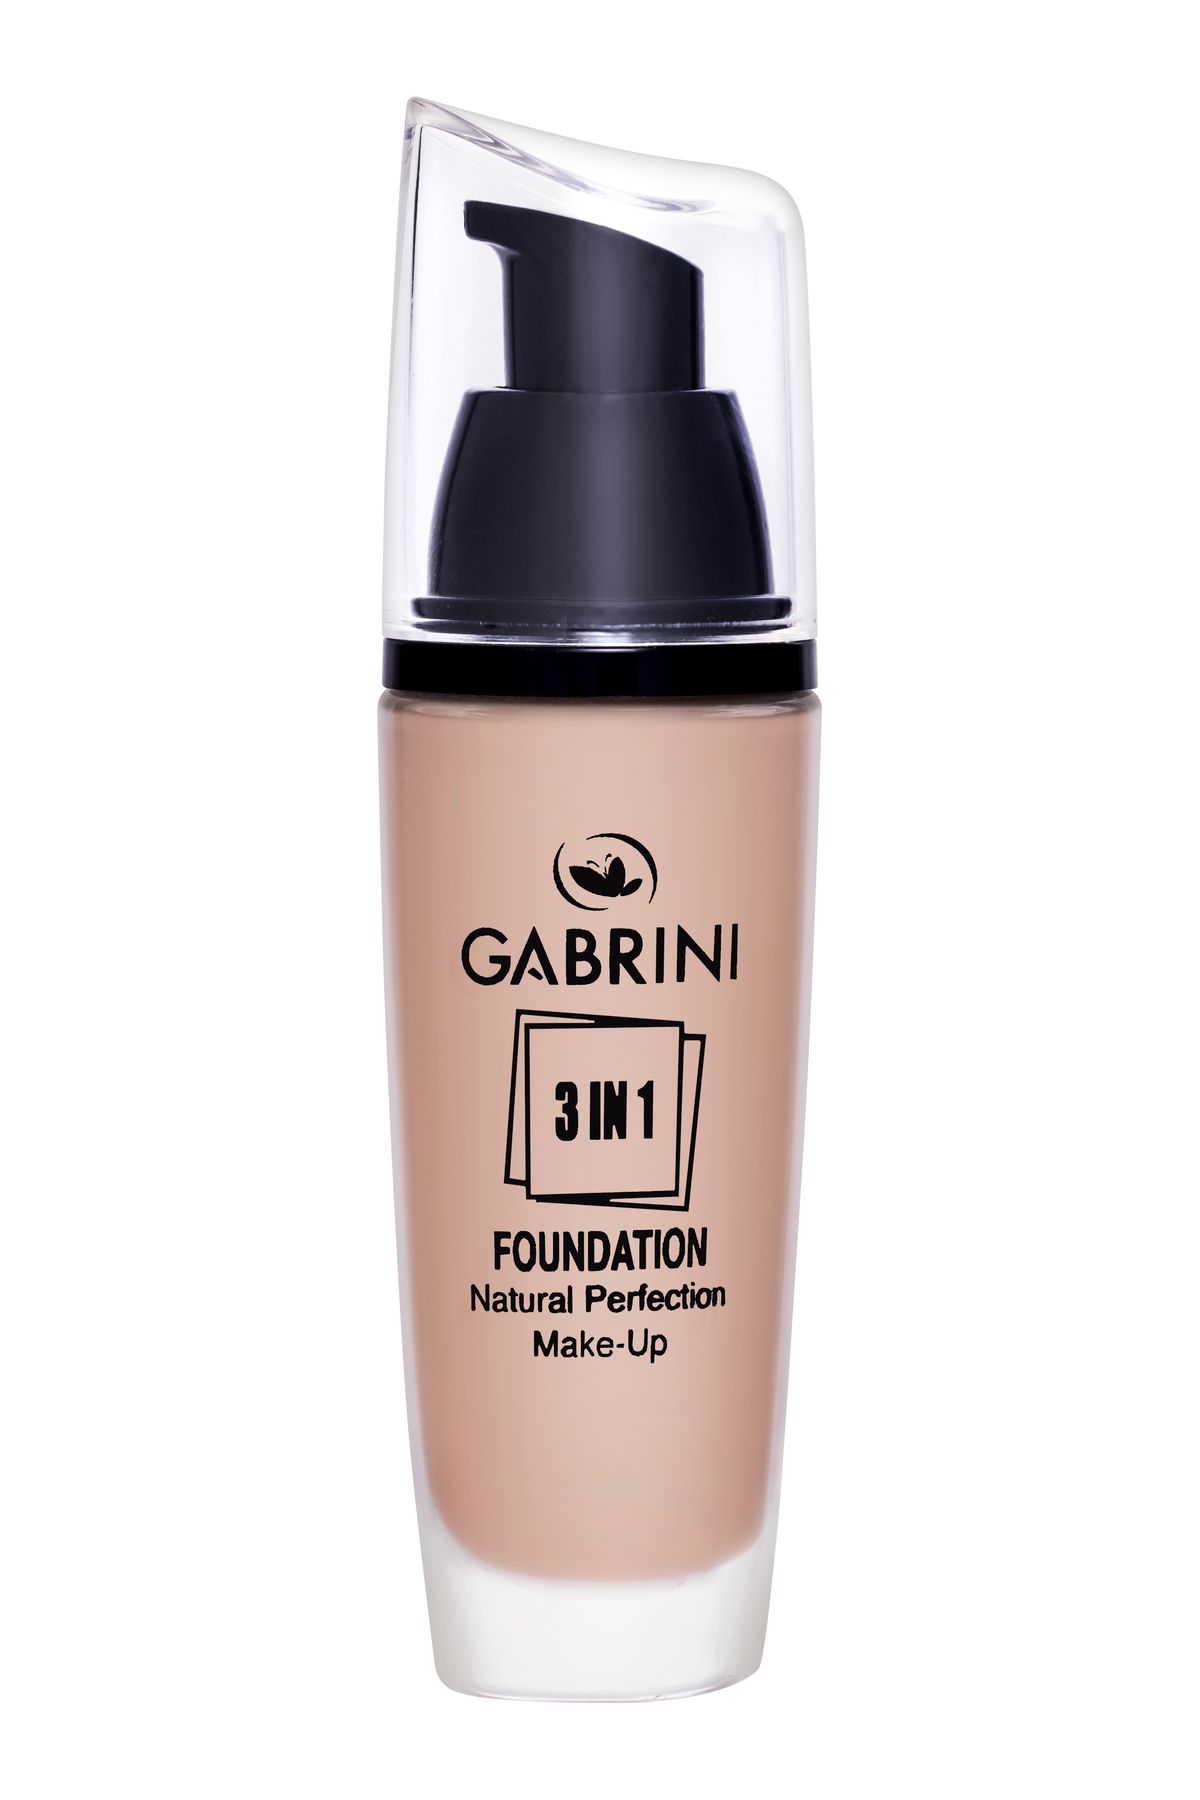 Gabrini 3 In 1 Foundation Natural Perfection Make Up 01